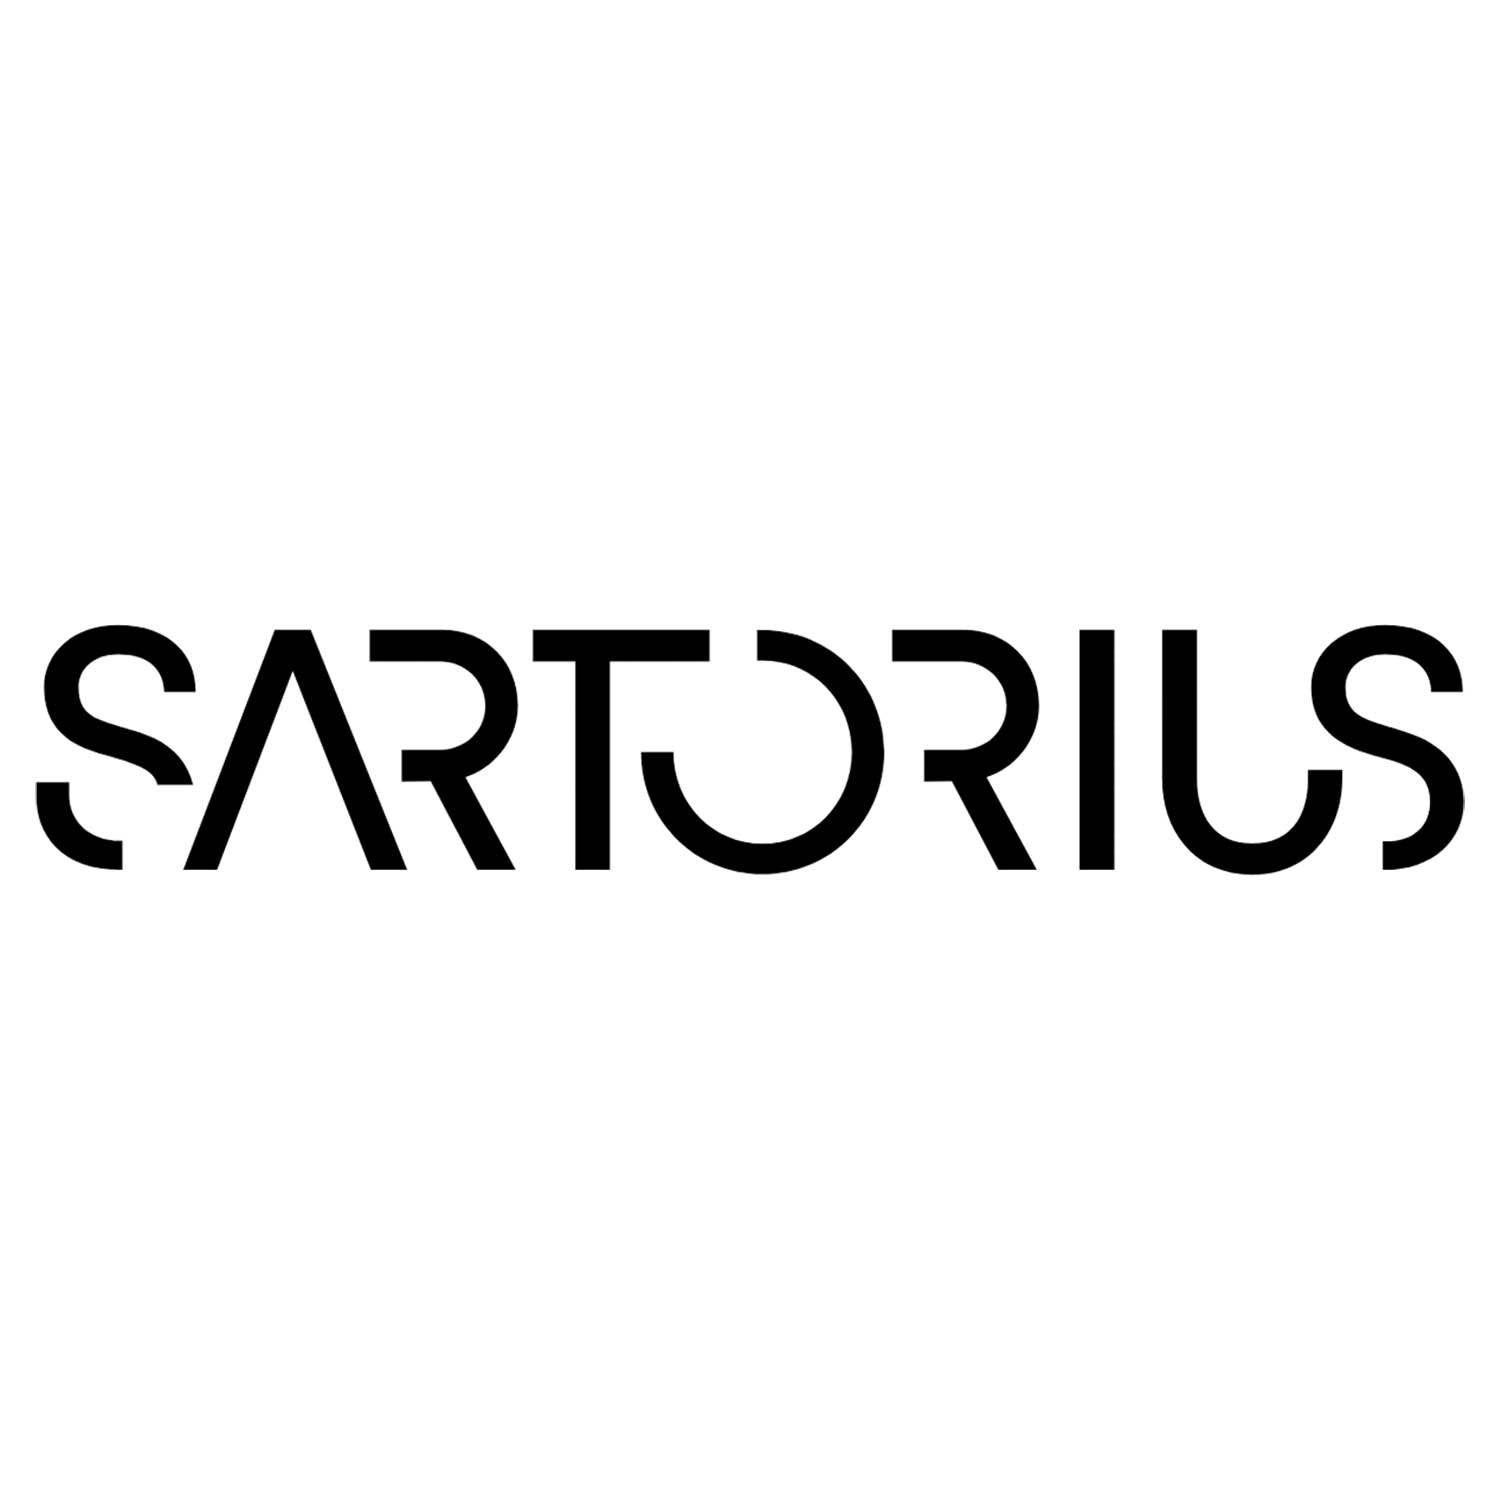 Sartorius FT-4-308-240, Technical Papers, Smooth/ Grade 3 w